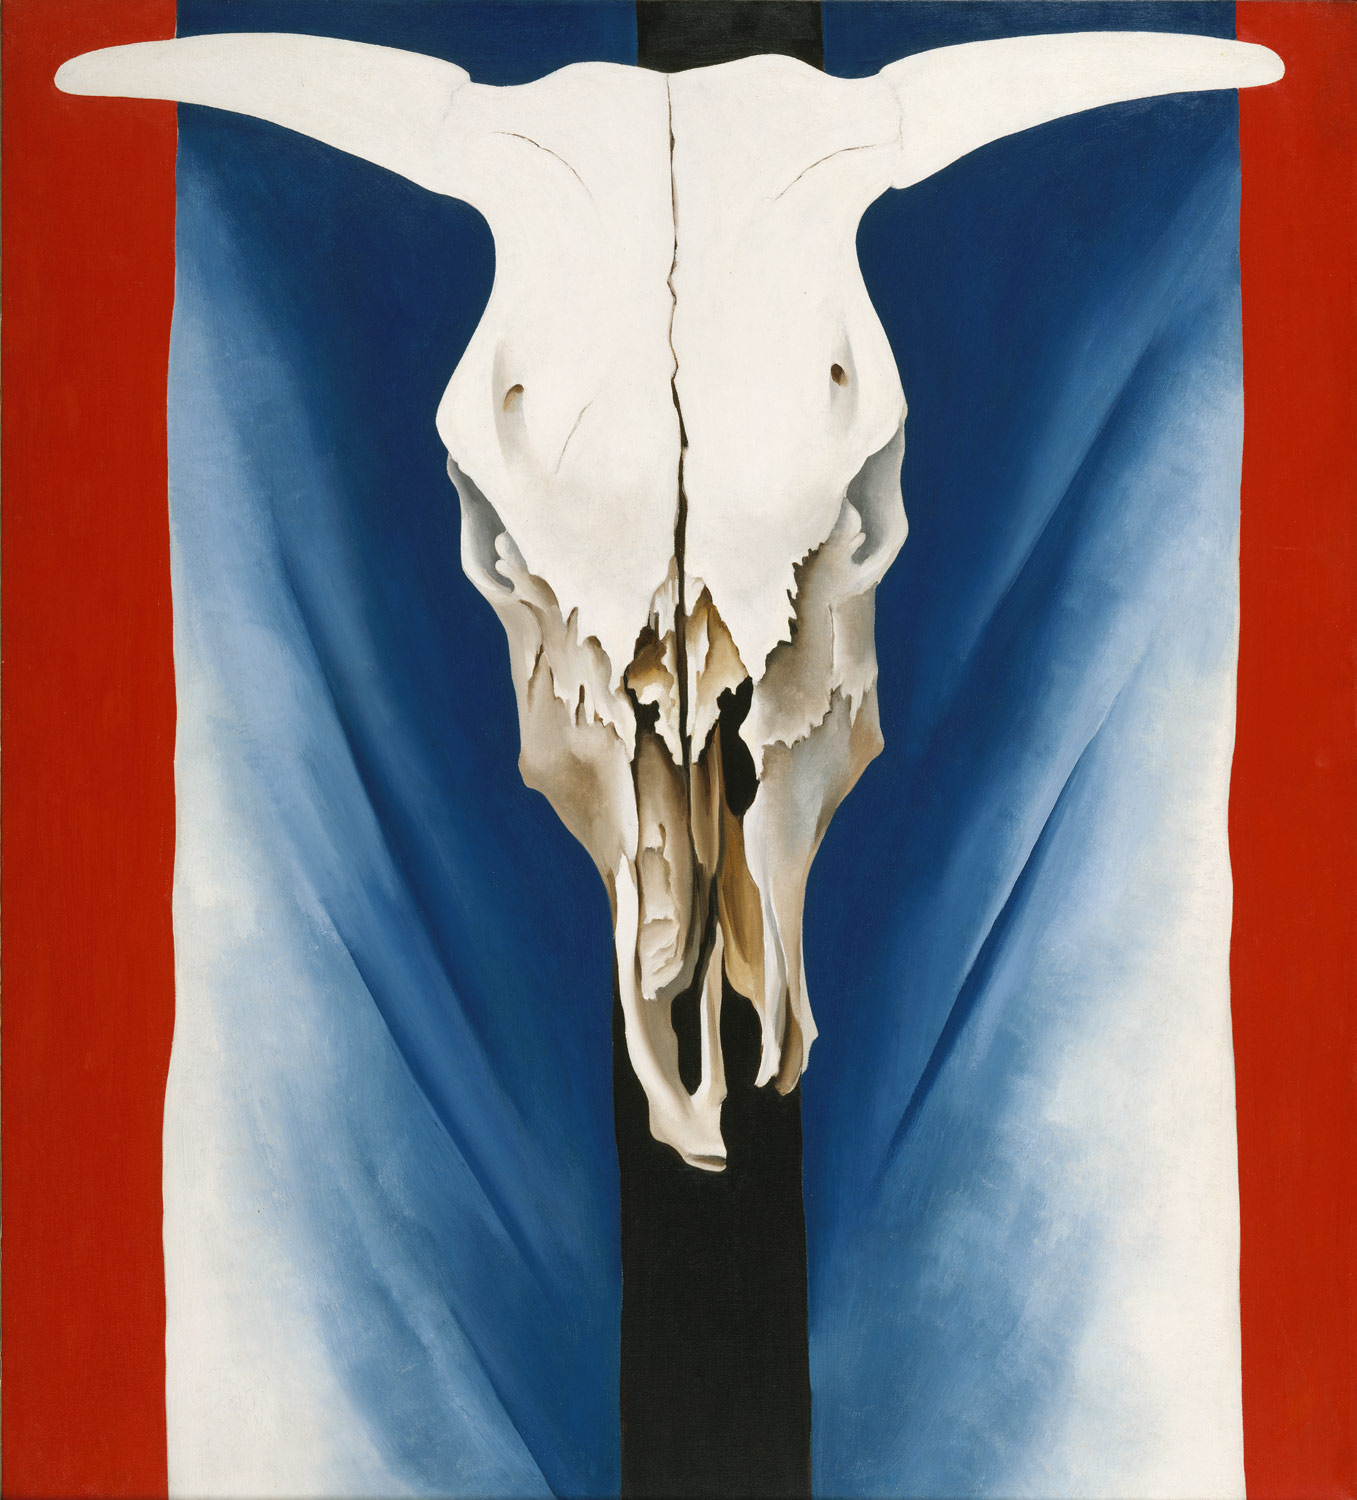 Cow's Skull: Red, White, and Blue Department: Nineteenth-Century, Modern, and Contemporary Art Culture/Period/Location: HB/TOA Date Code: Working Date: 1931 photography by mma, Digital File DT1397.tif retouched by film and media (jnc) 2_4_10